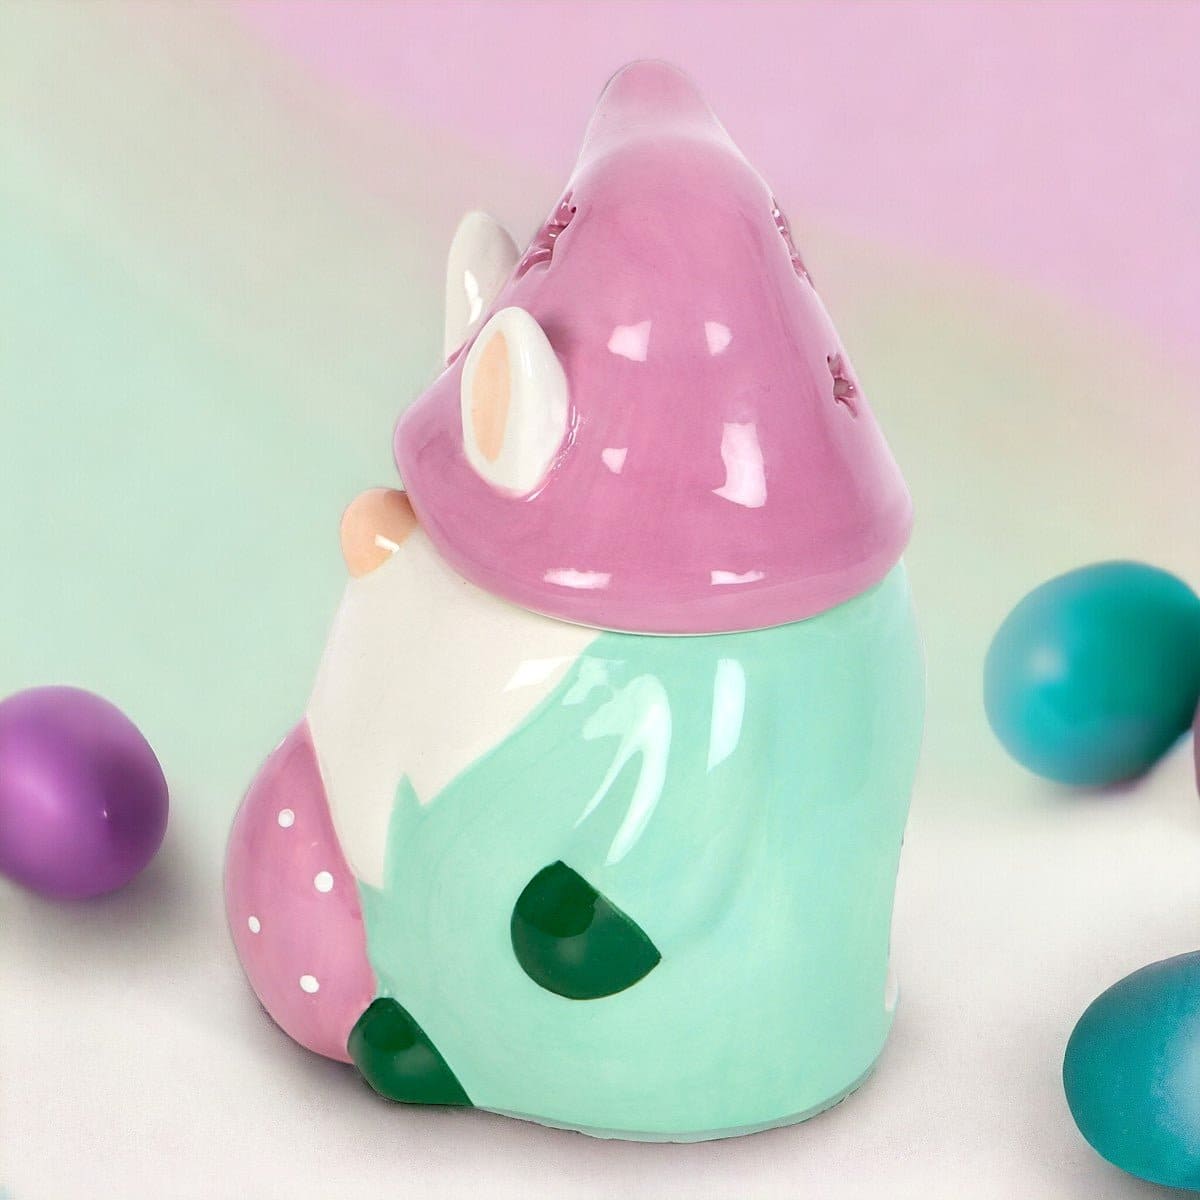 Pastel-colored Bunny Gonk, Easter Oil Burner, Wax Warmer - Oil Burner & Wax Melters by Jones Home & Gifts